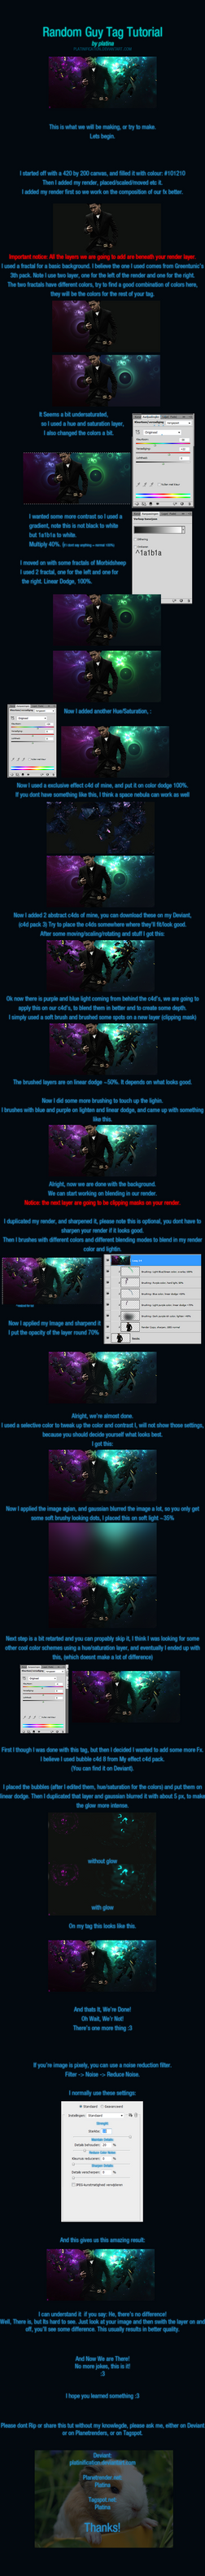 random_guy_tag_tutorial_by_platinification-d4bdw0o.png